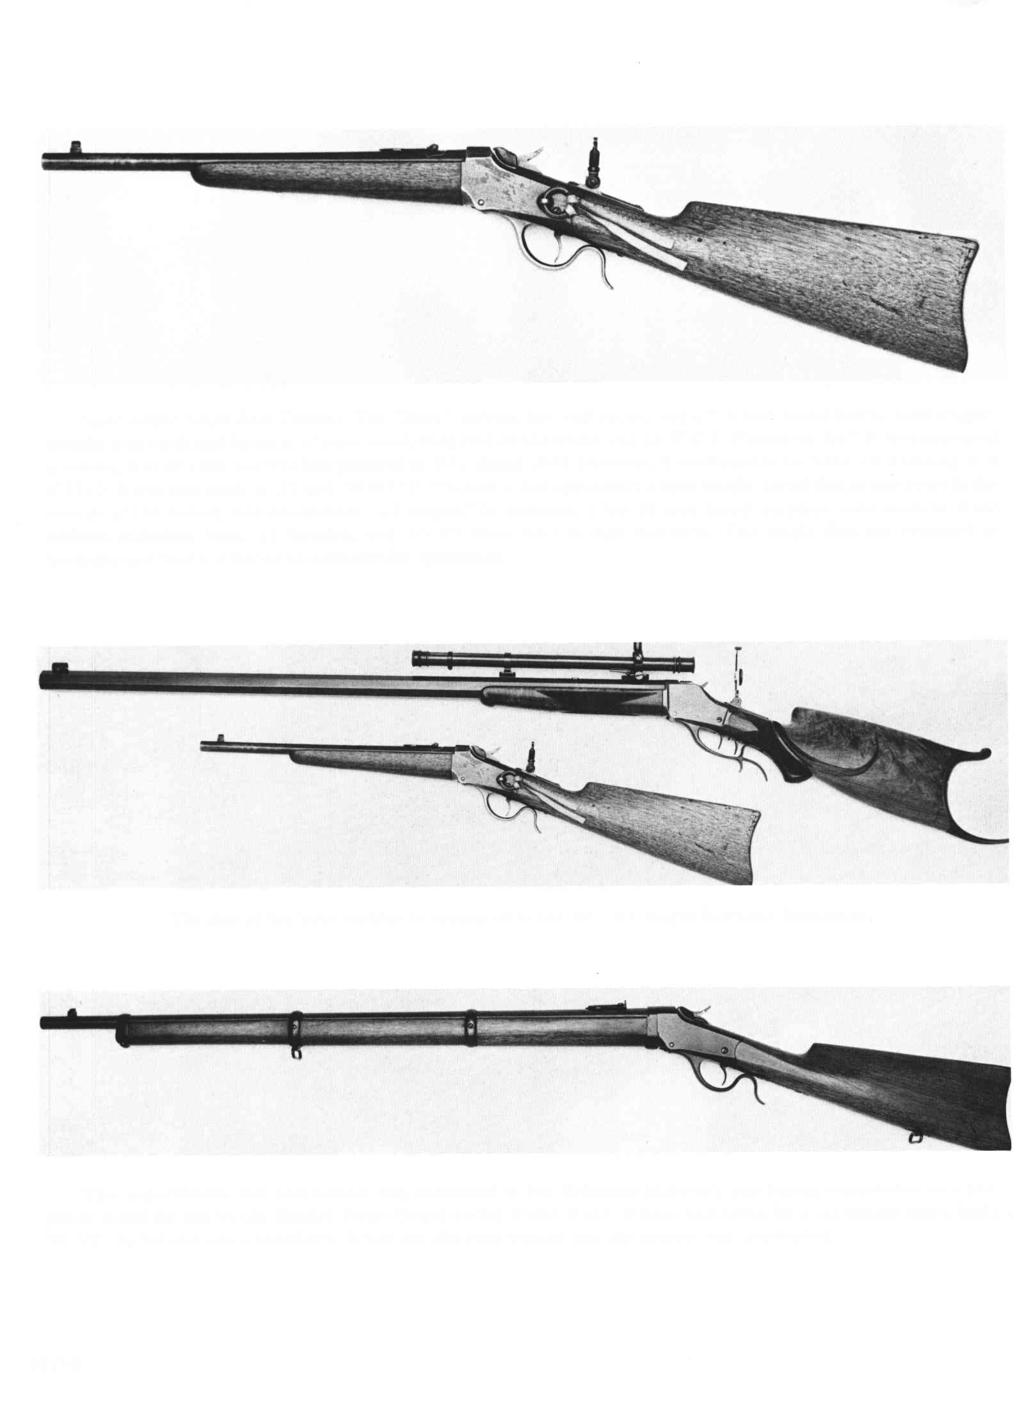 Light weight Single Shot Carbine. The "Baby" carbine, low wall action, had a "15 inch round barrel, plain trigger, straight grip stock and forearm of plain wood, sling ring on the frame, cal.44 W.C.F.